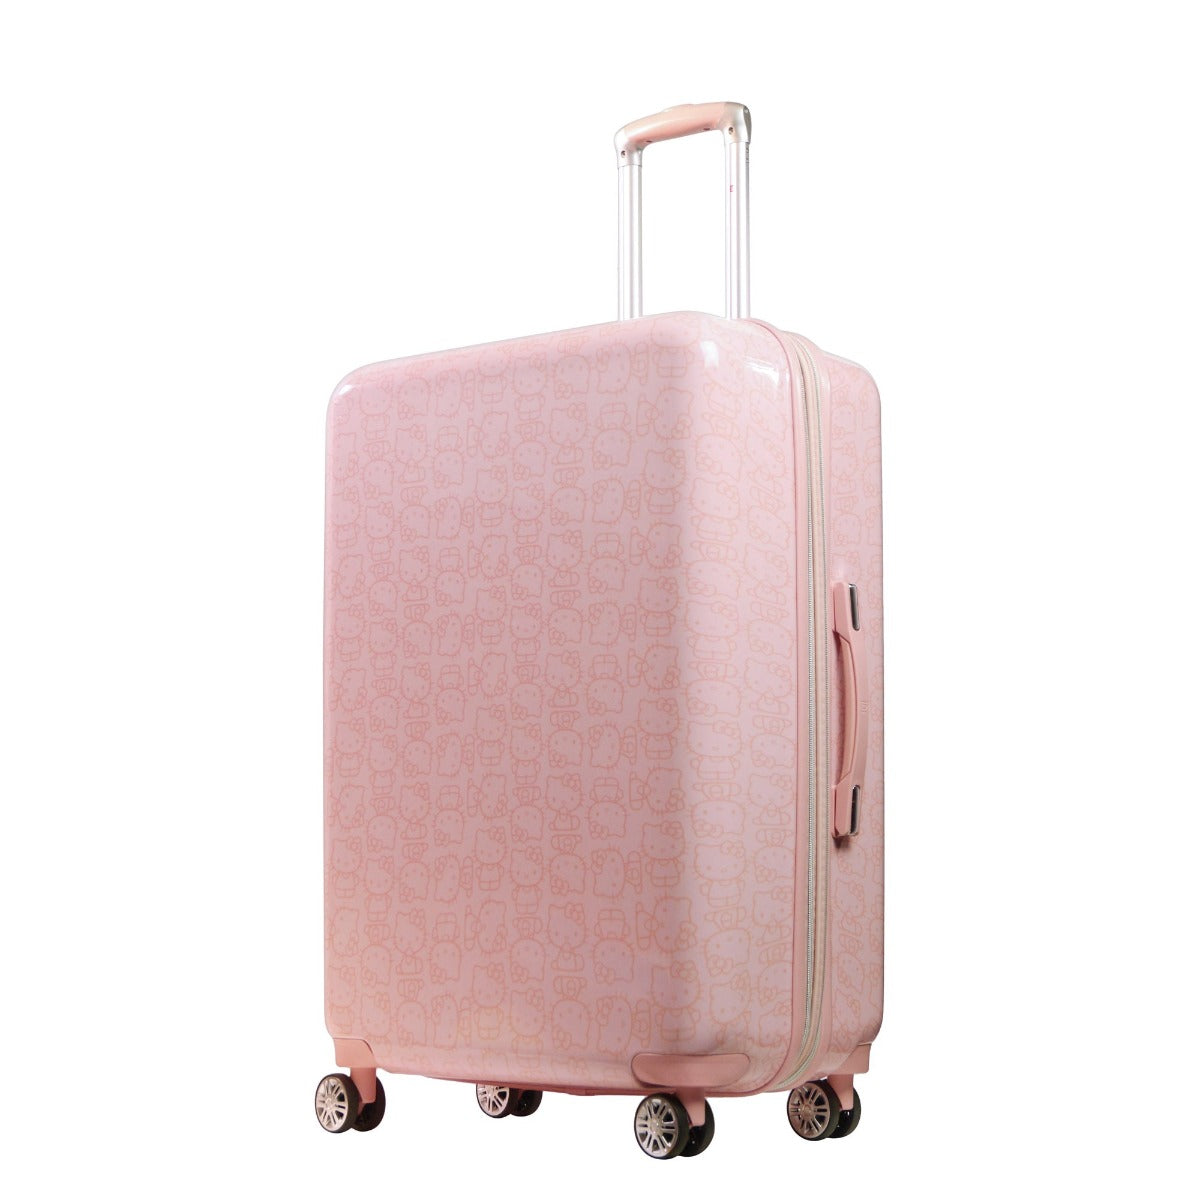 Hello Kitty Pose All Over Print 29.5" Hard-Sided Luggage Pink checked spinner suticase